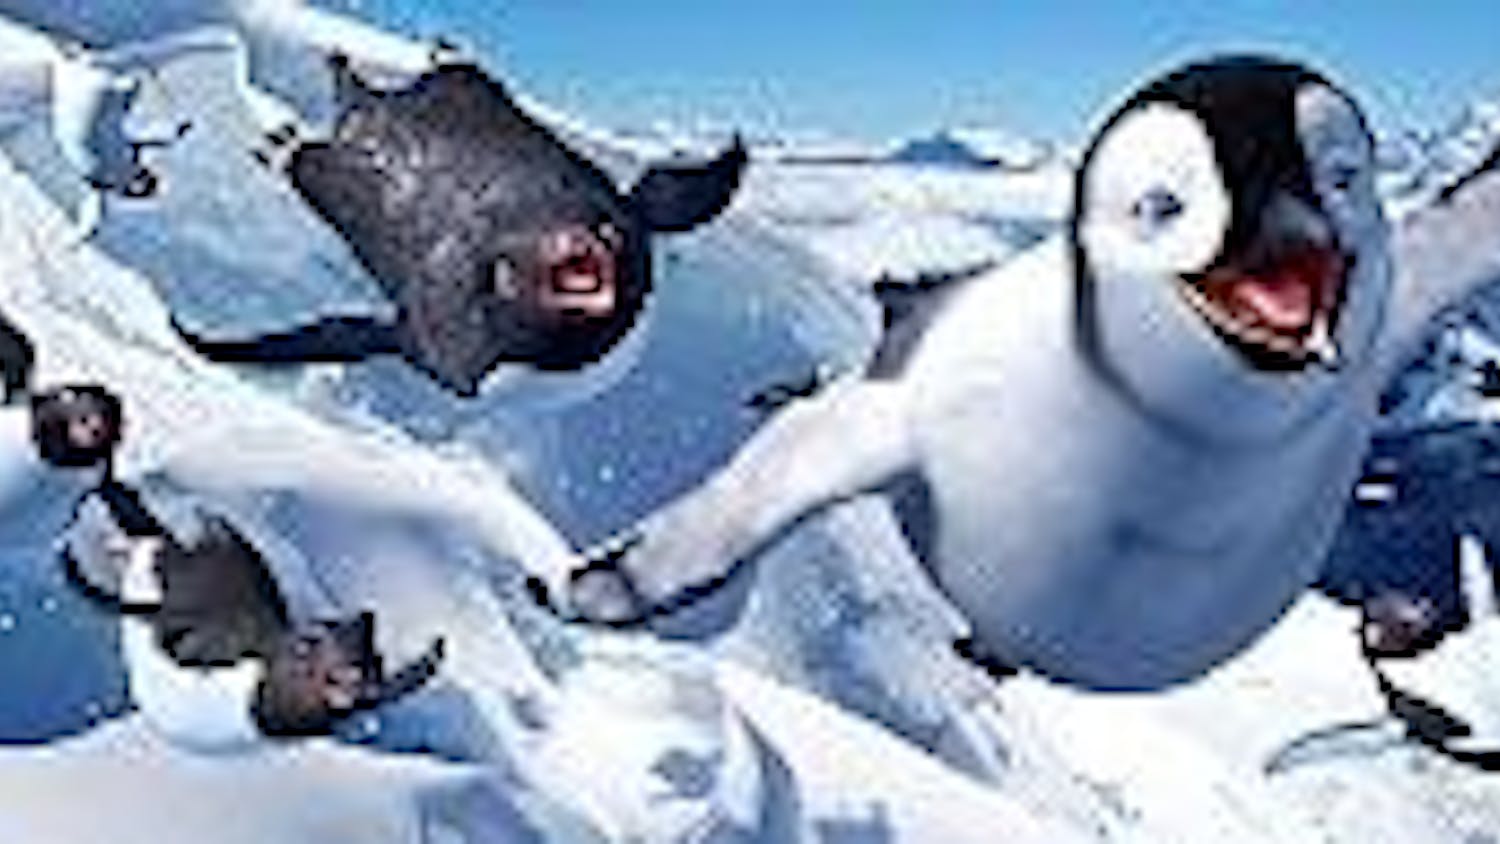 'Happy Feet' soared to the top of the box office charts two weeks ago and has held its icy ground against James Bond. 